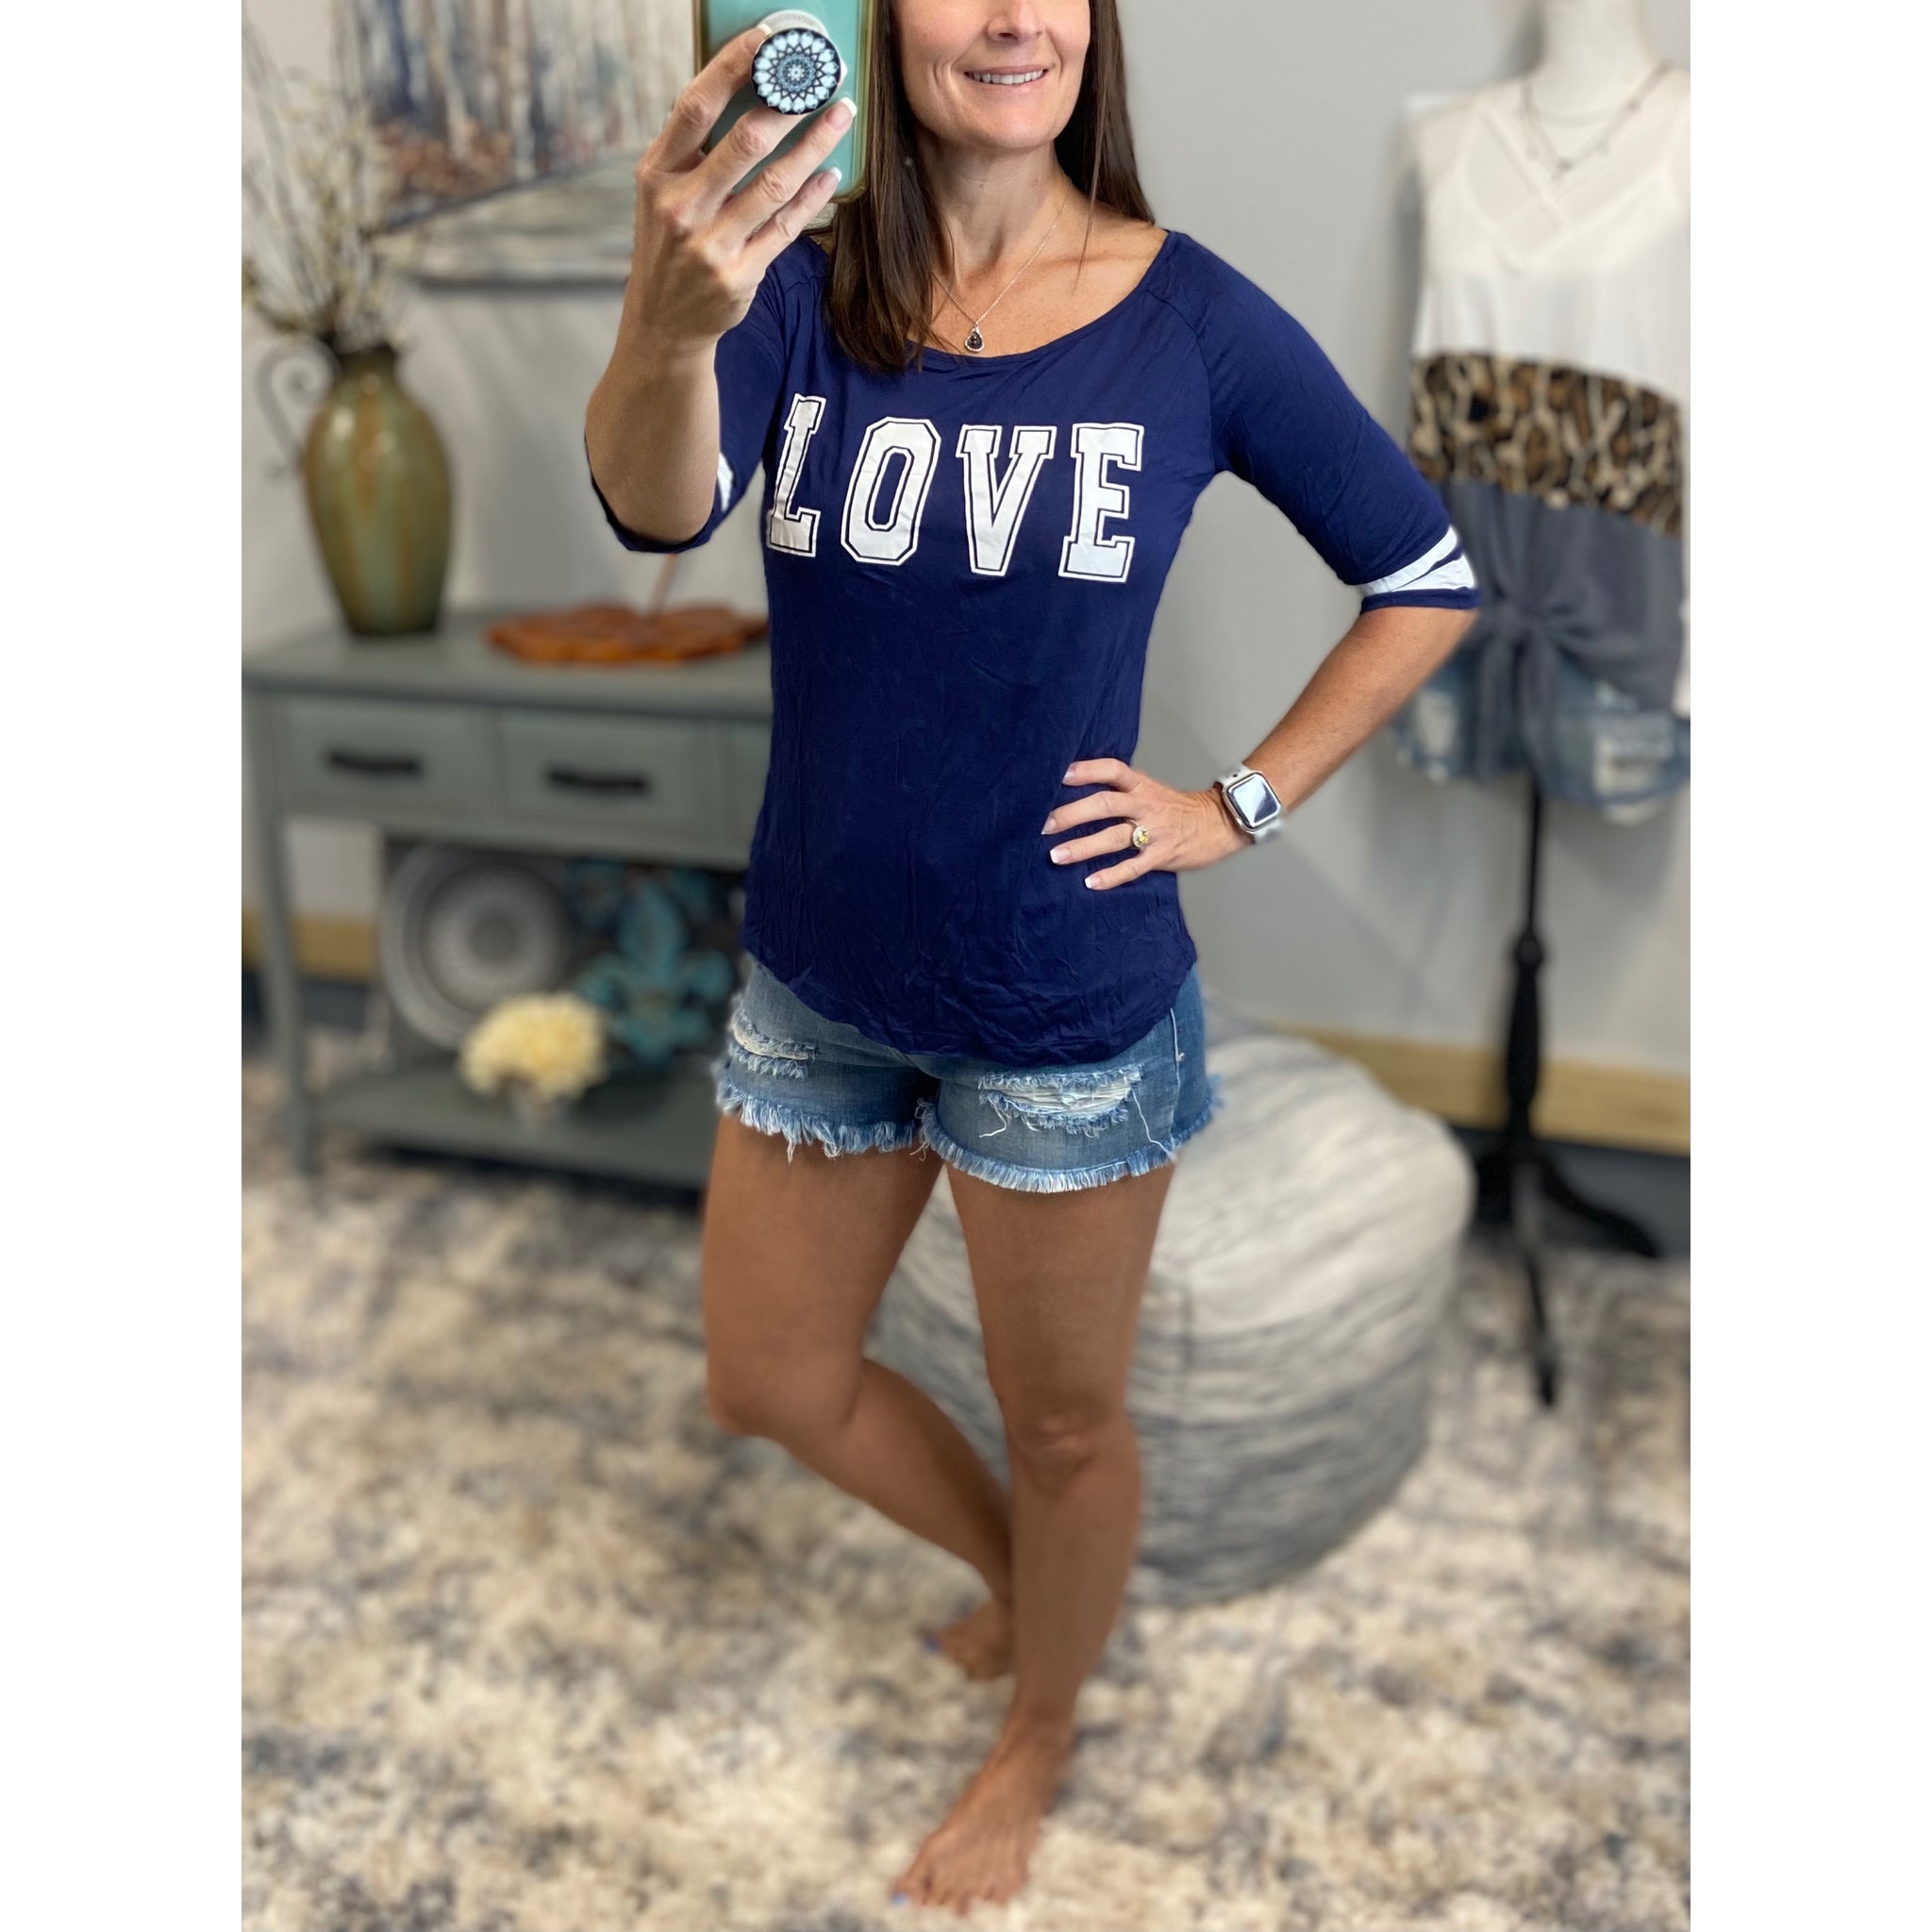 Very Sexy LOVE Sporty Football Sporty Floaty Scoop Tee Shirt Navy Blue S/M/L